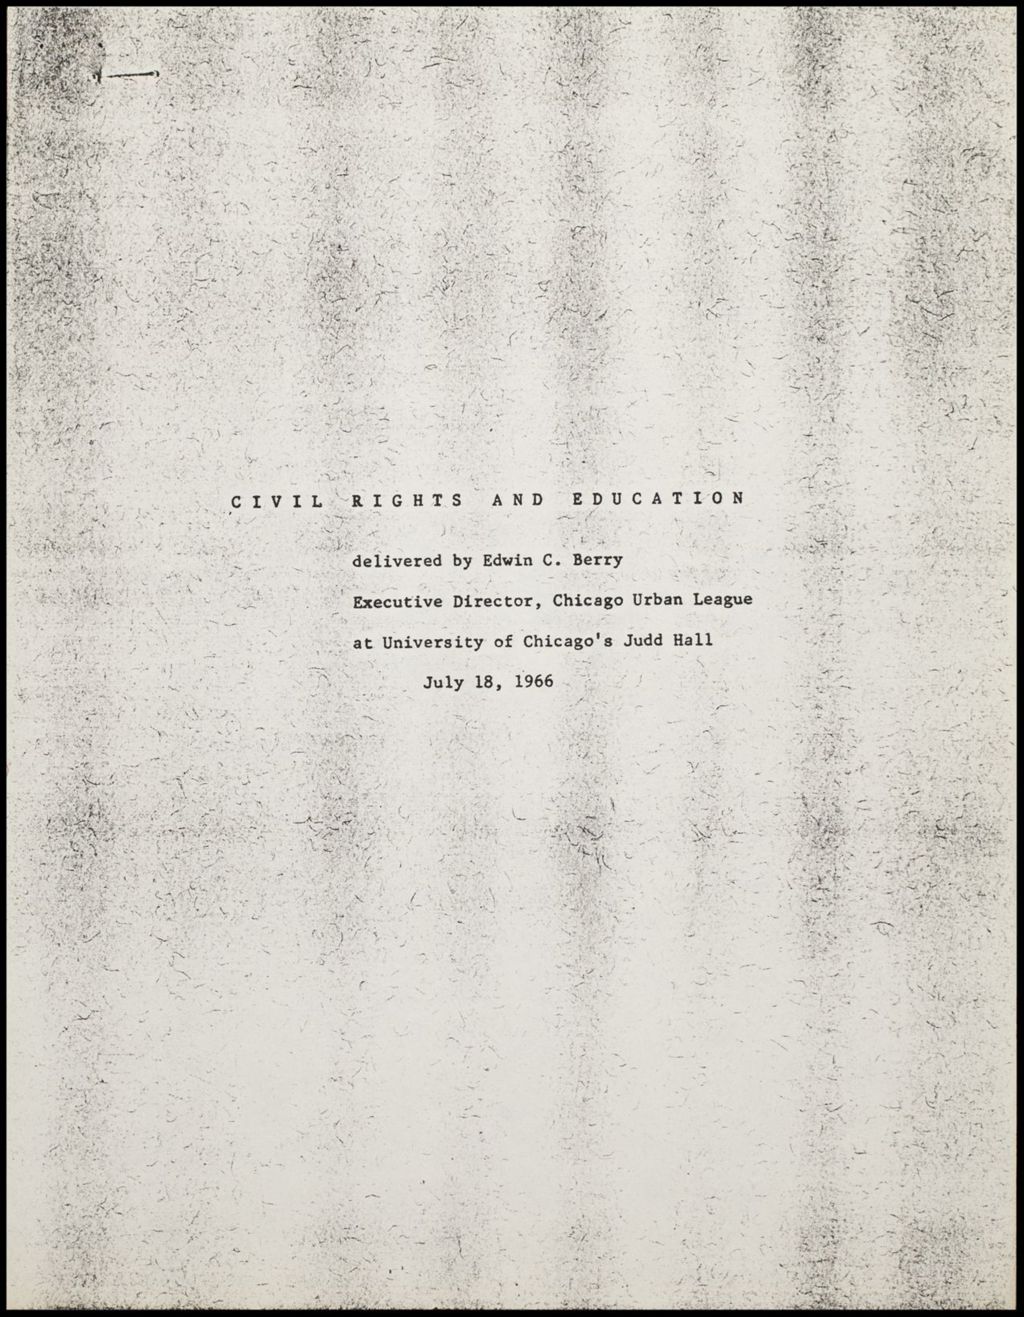 Miniature of Civil Rights and Education, 1966 (Folder III-2935)